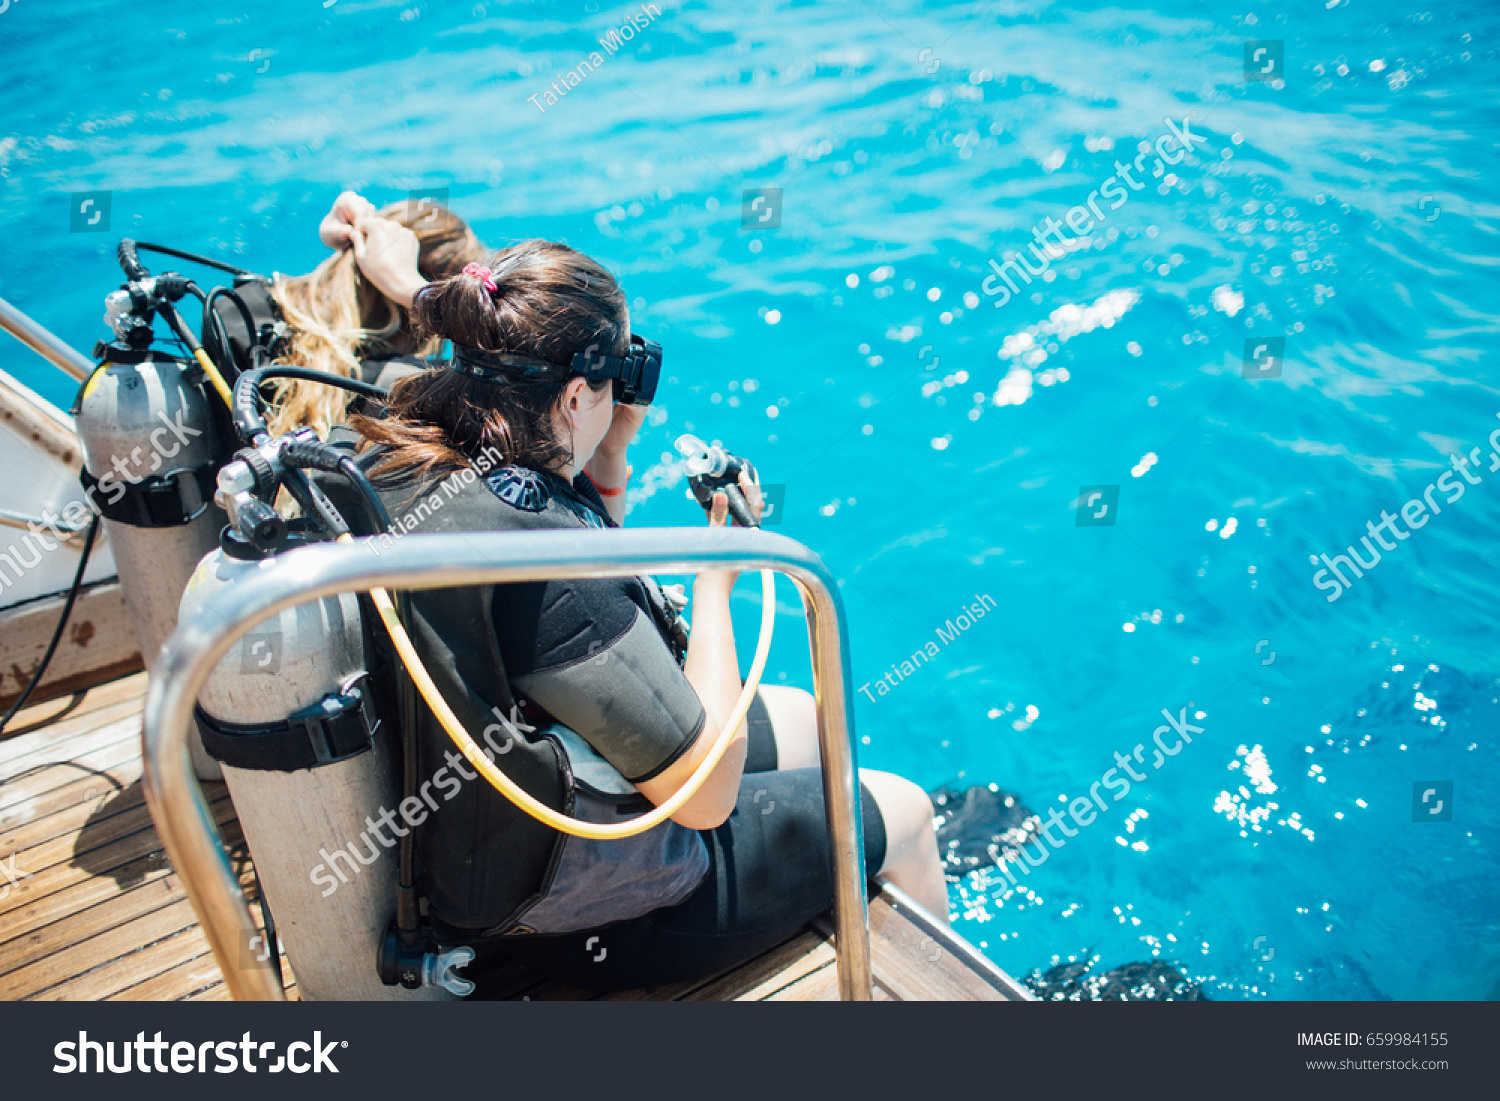 Scuba diver before diving. Diving lesson in open water. #659984155